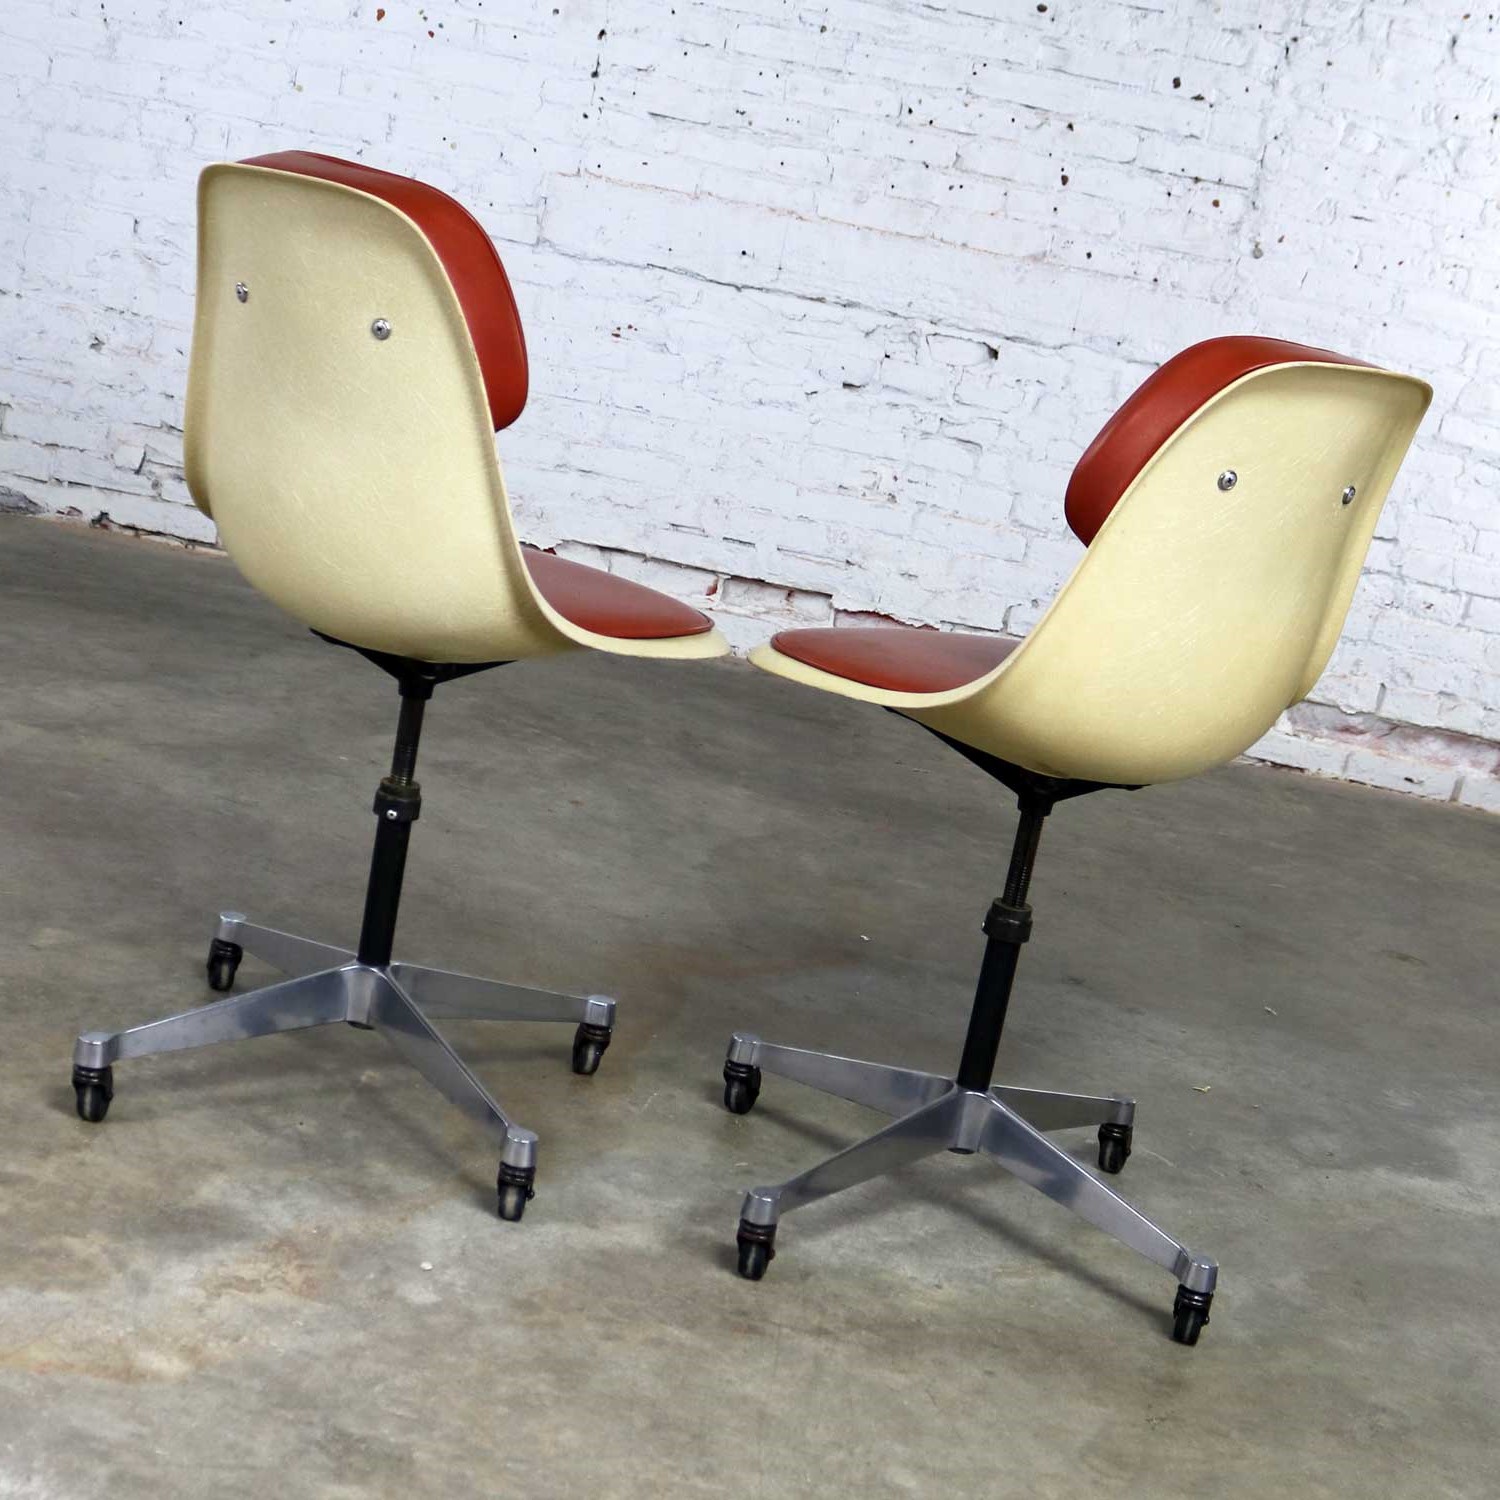 Eames Herman Miller PSCC-A-4 Pivoting Task Shell Chair Pair on Contract Base w/Casters